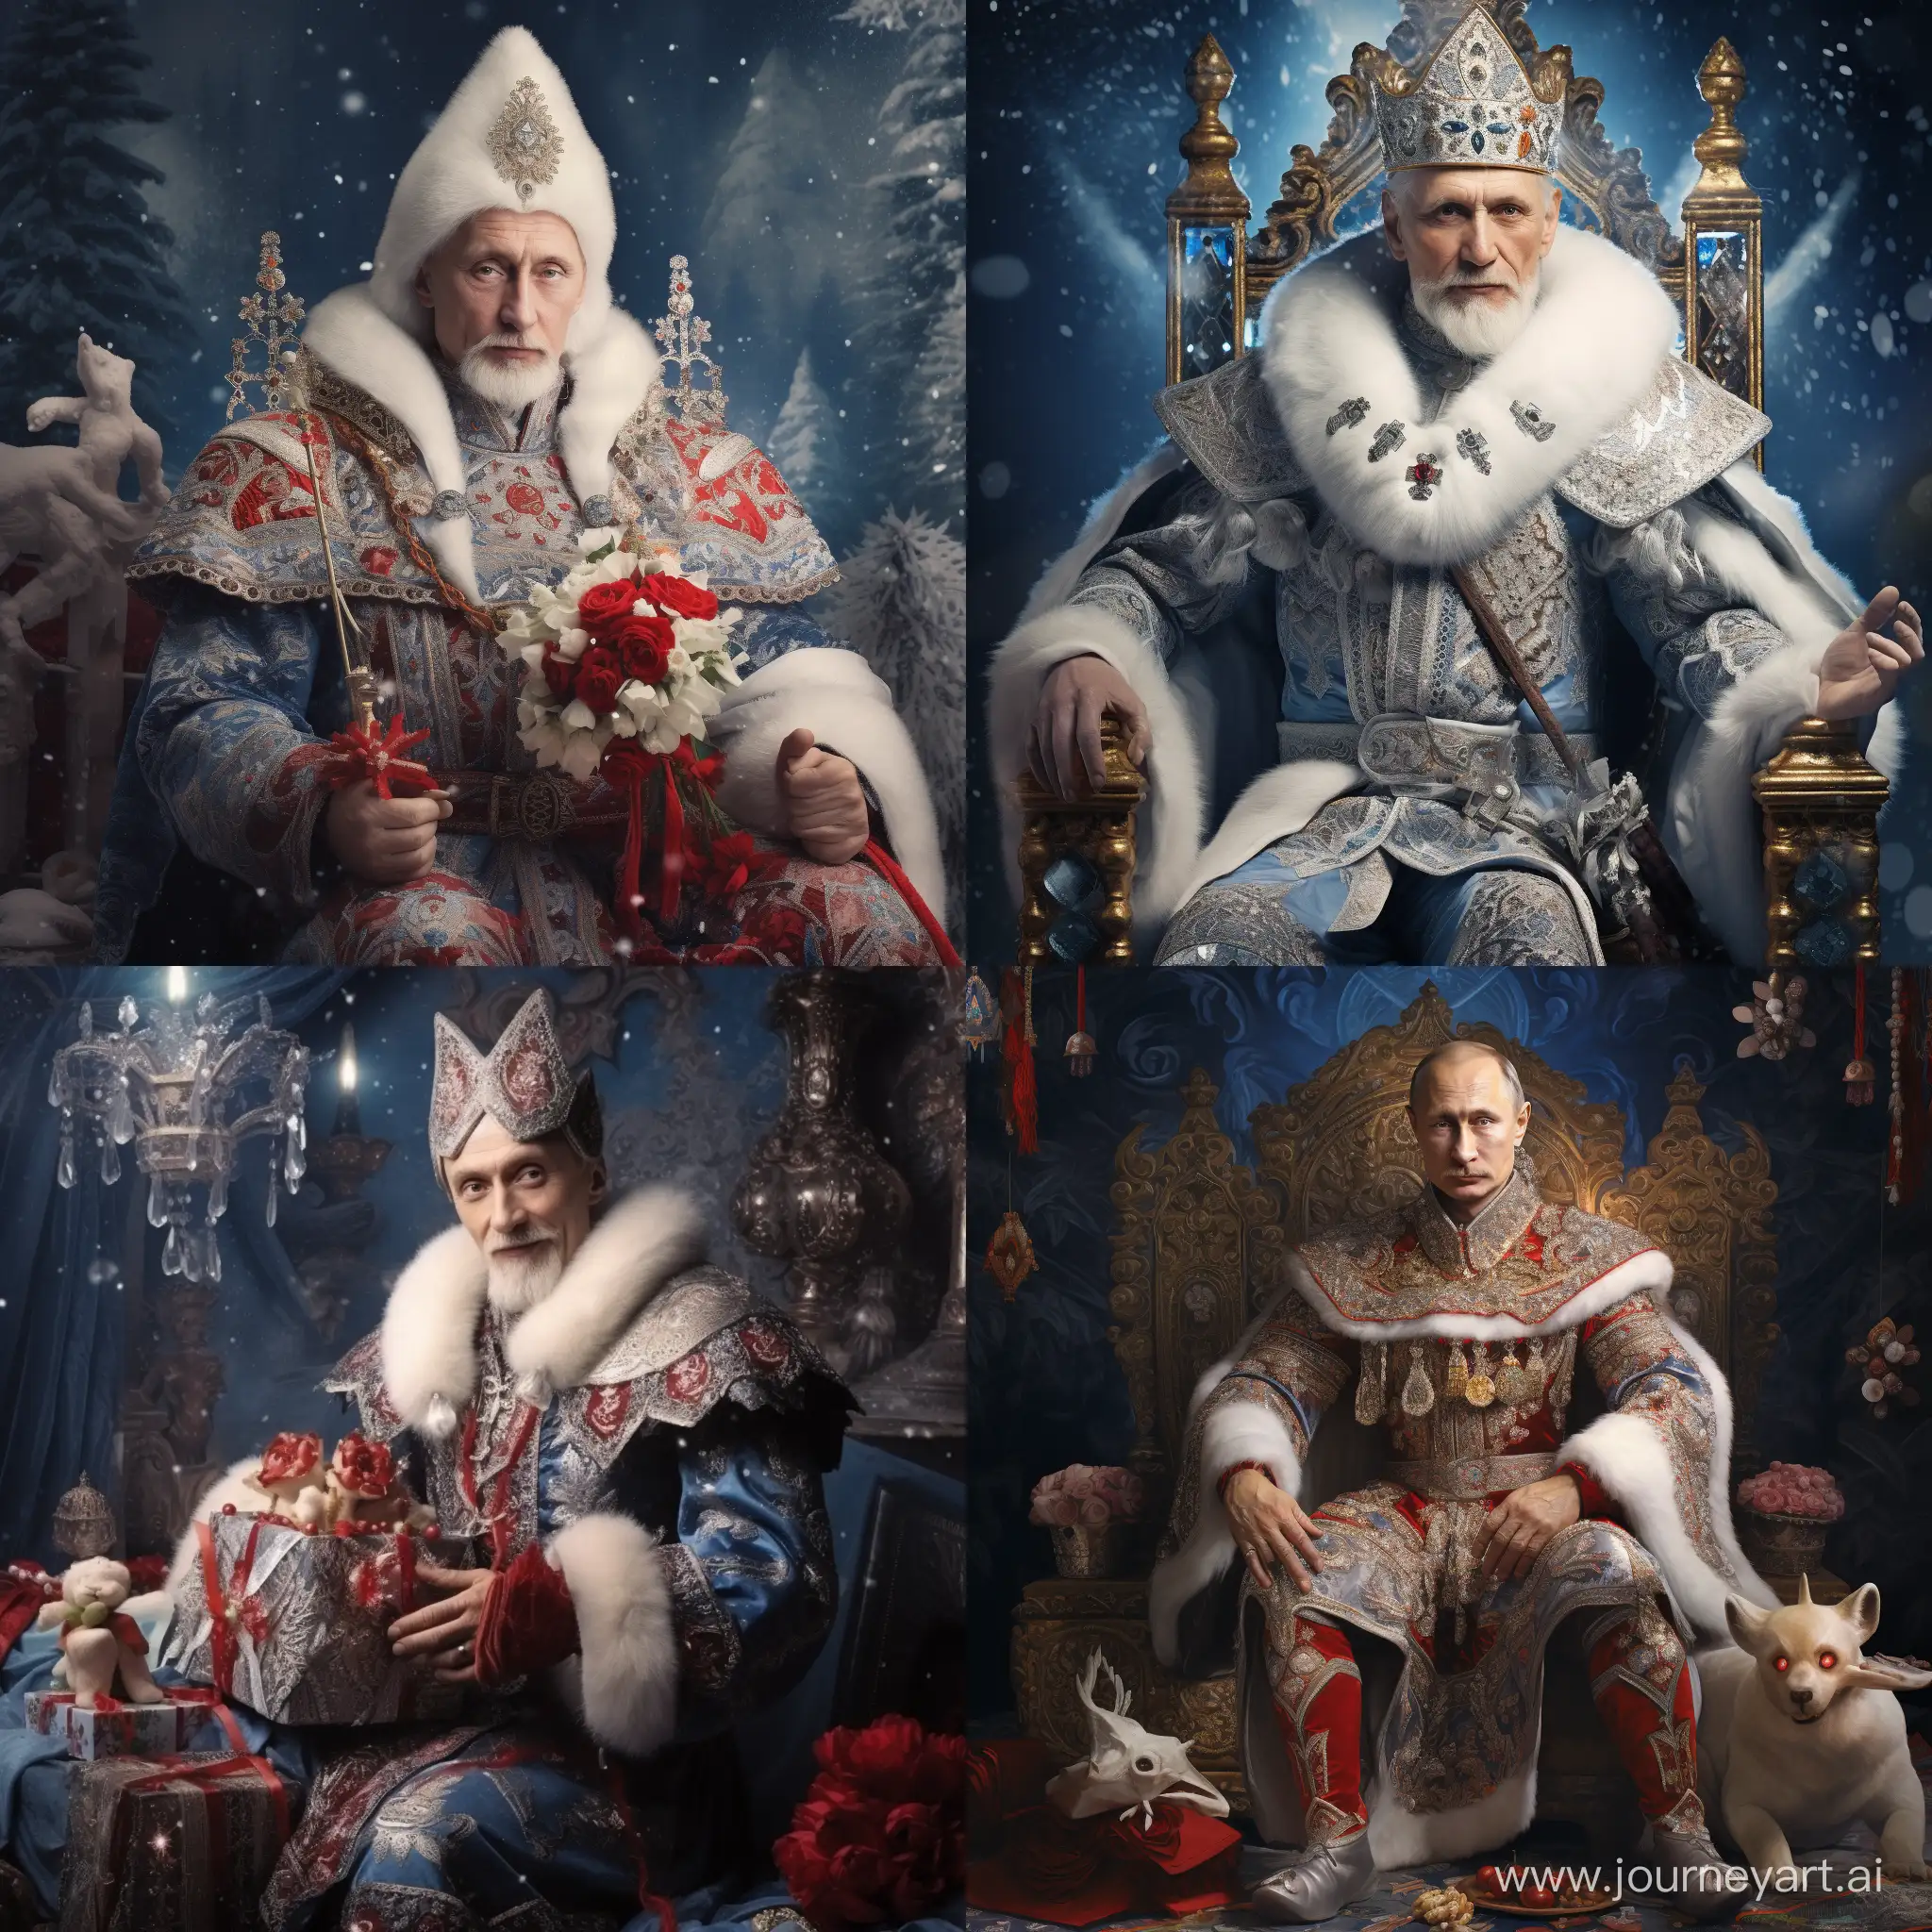 Vladimir Putin as Father Frost giving presents.